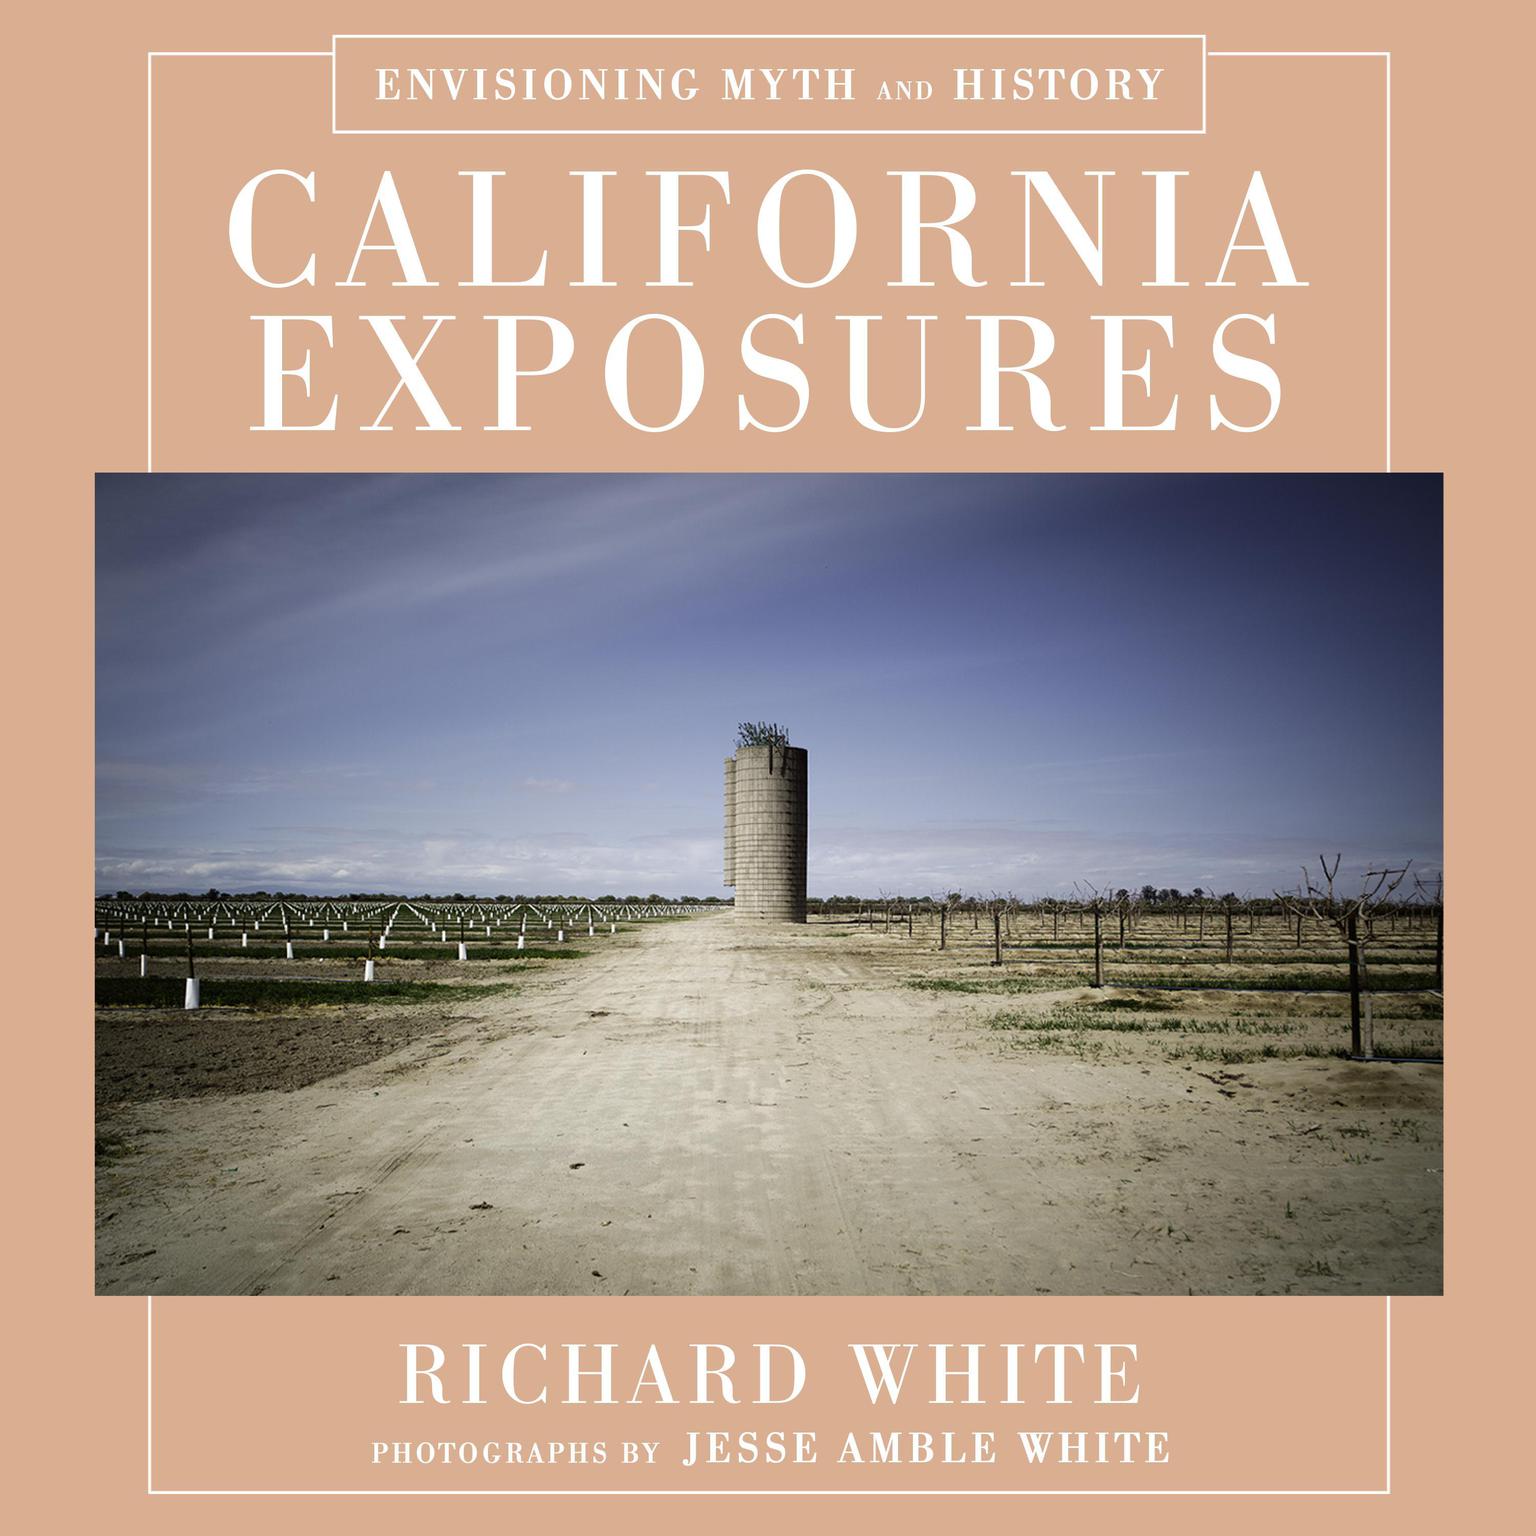 California Exposures: Envisioning Myth and History Audiobook, by Richard White